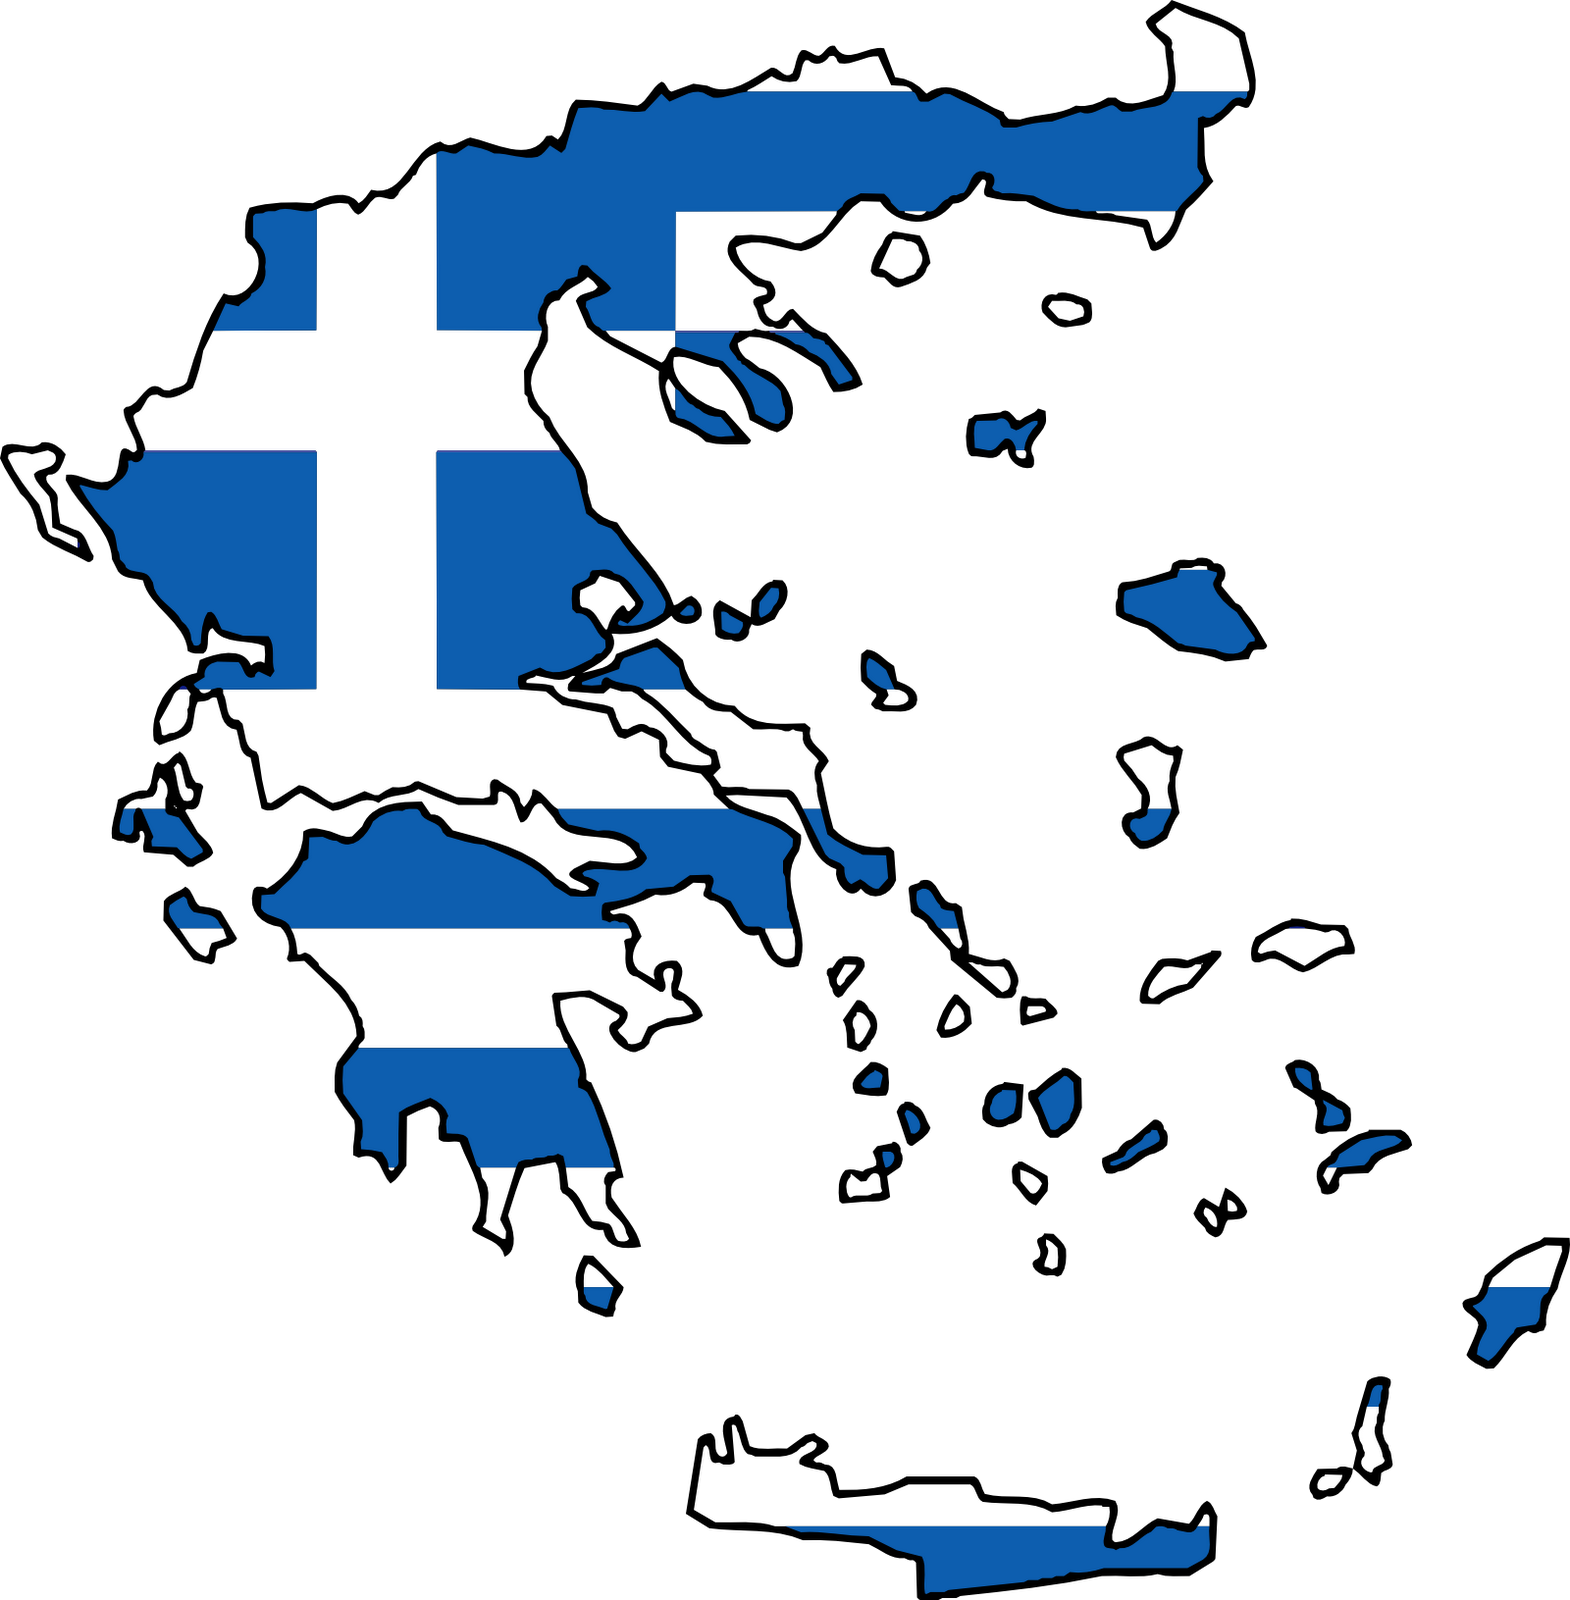 Union Flag Hd Wallpapers Backgrounds - Greece Map Tattoo (1570x1600)